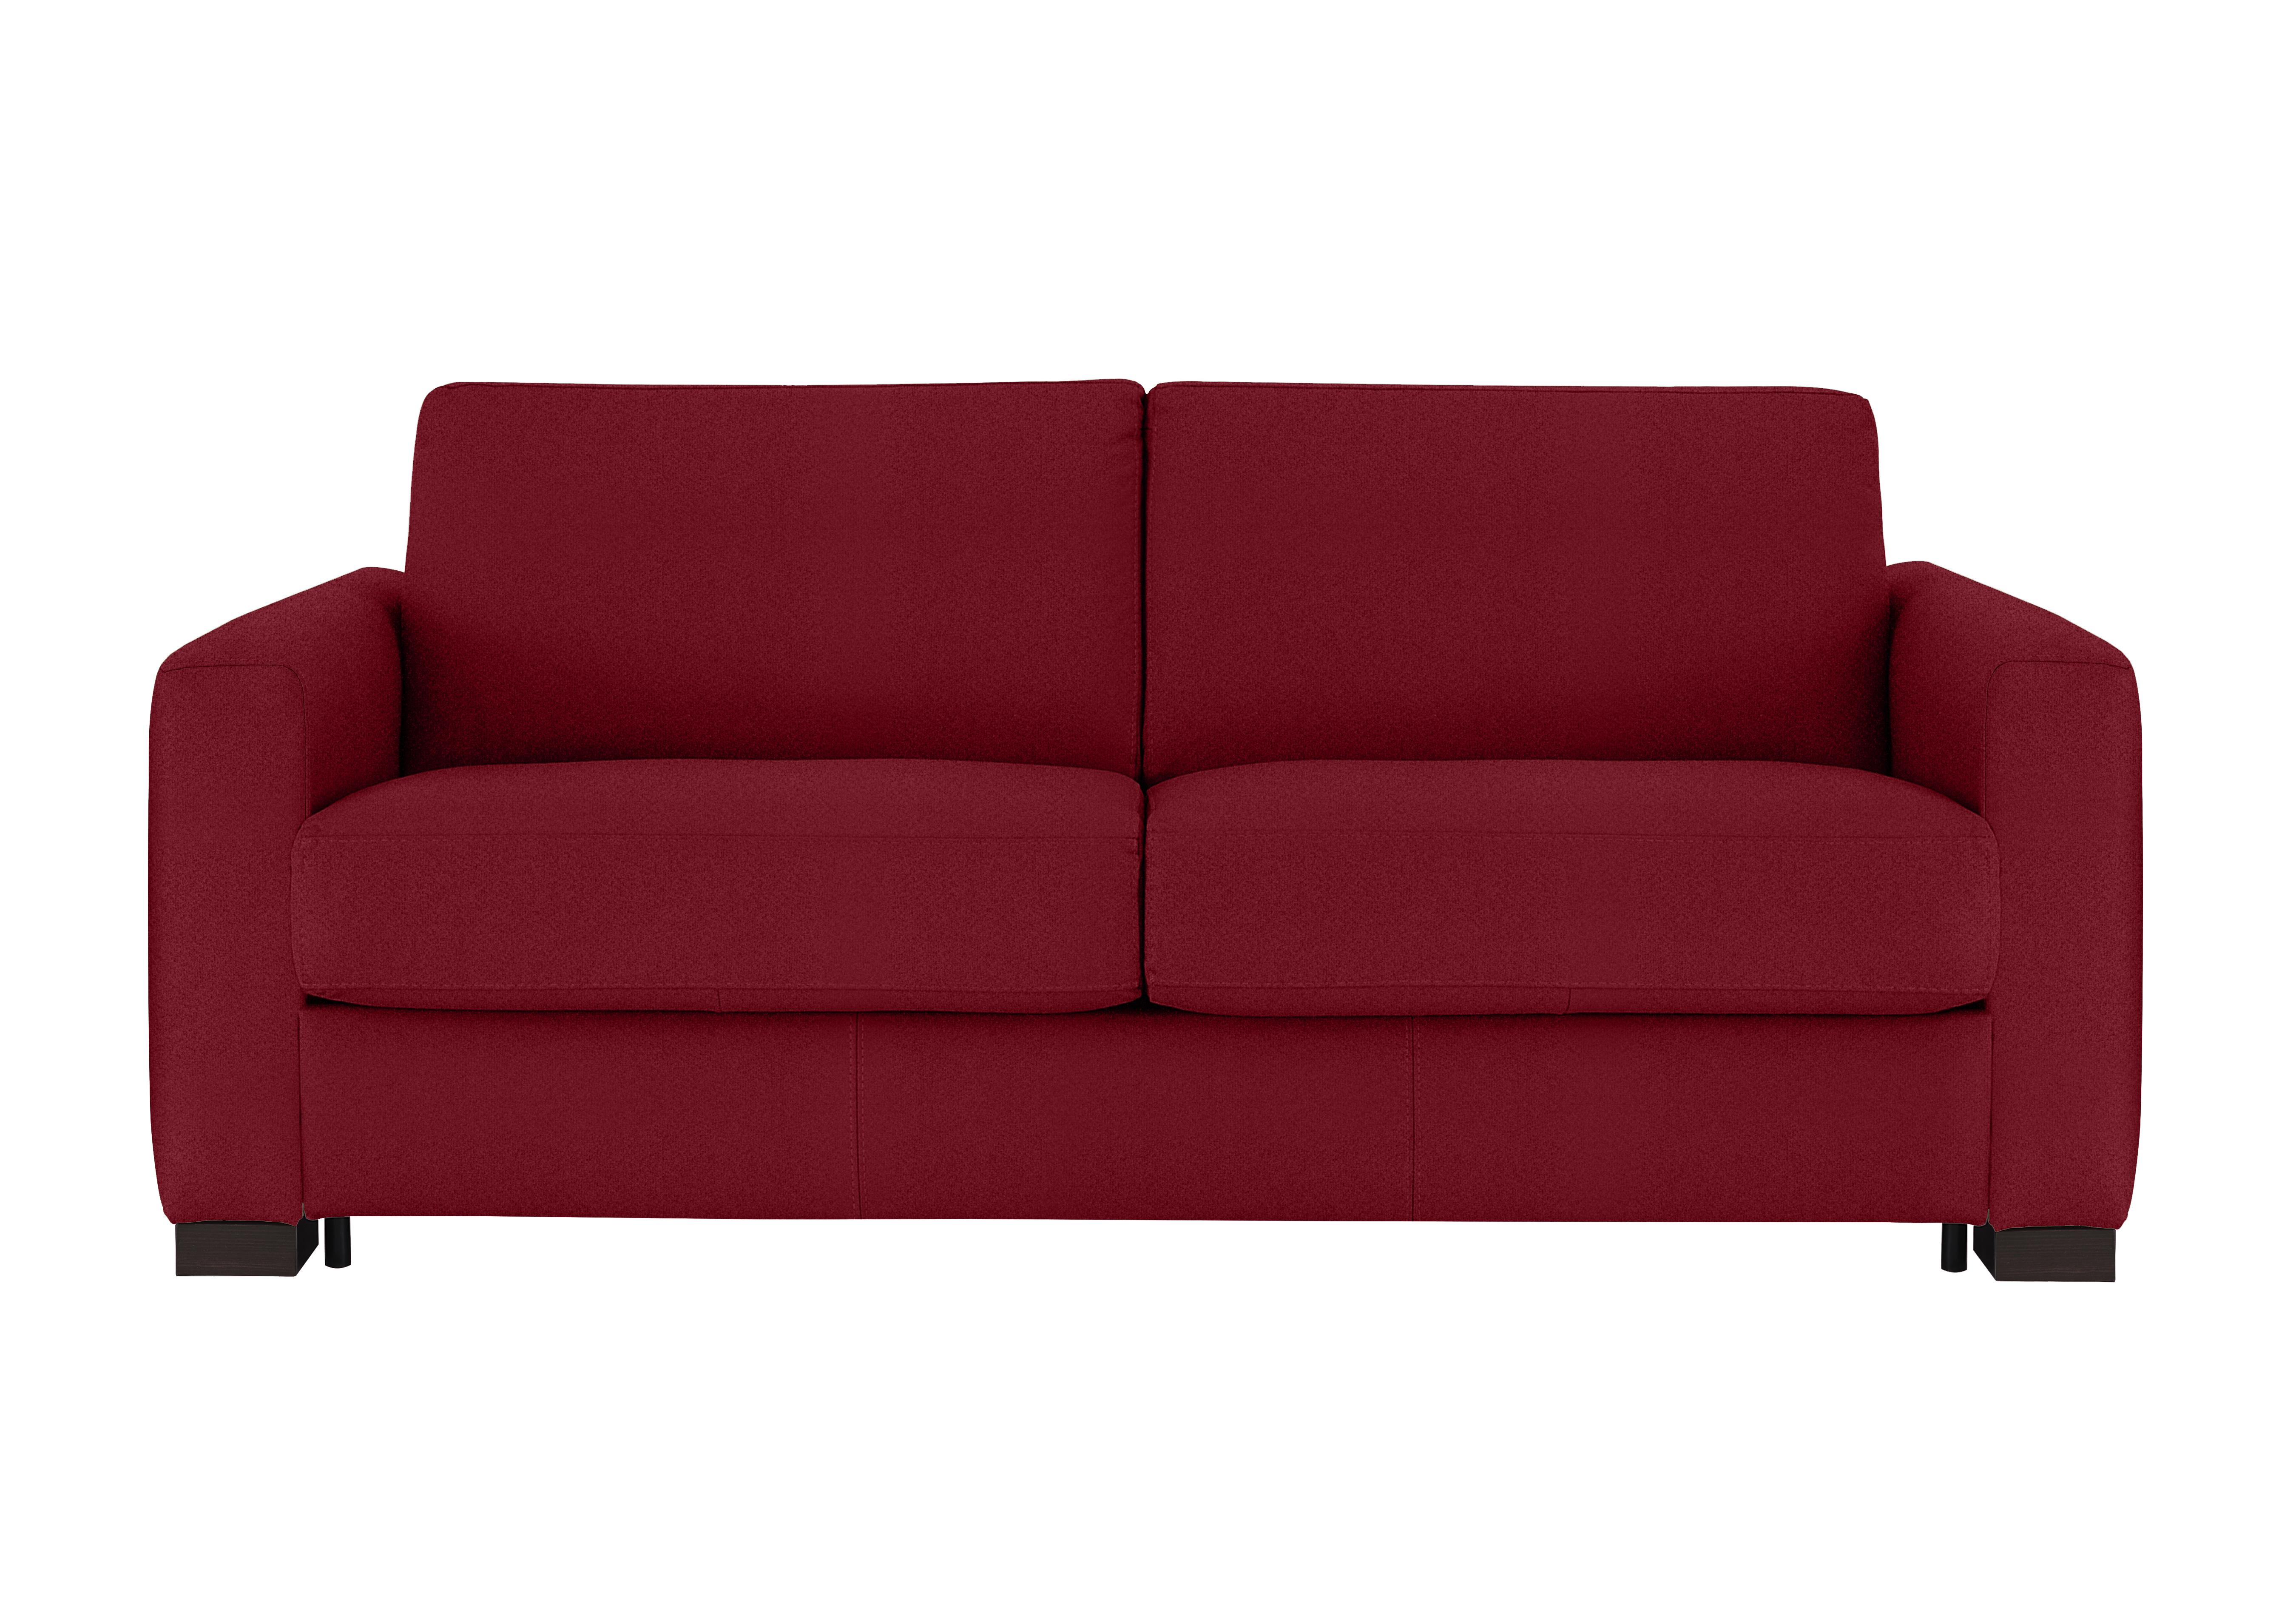 Alcova 3 Seater Fabric Sofa Bed with Box Arms in Coupe Rosso 305 on Furniture Village